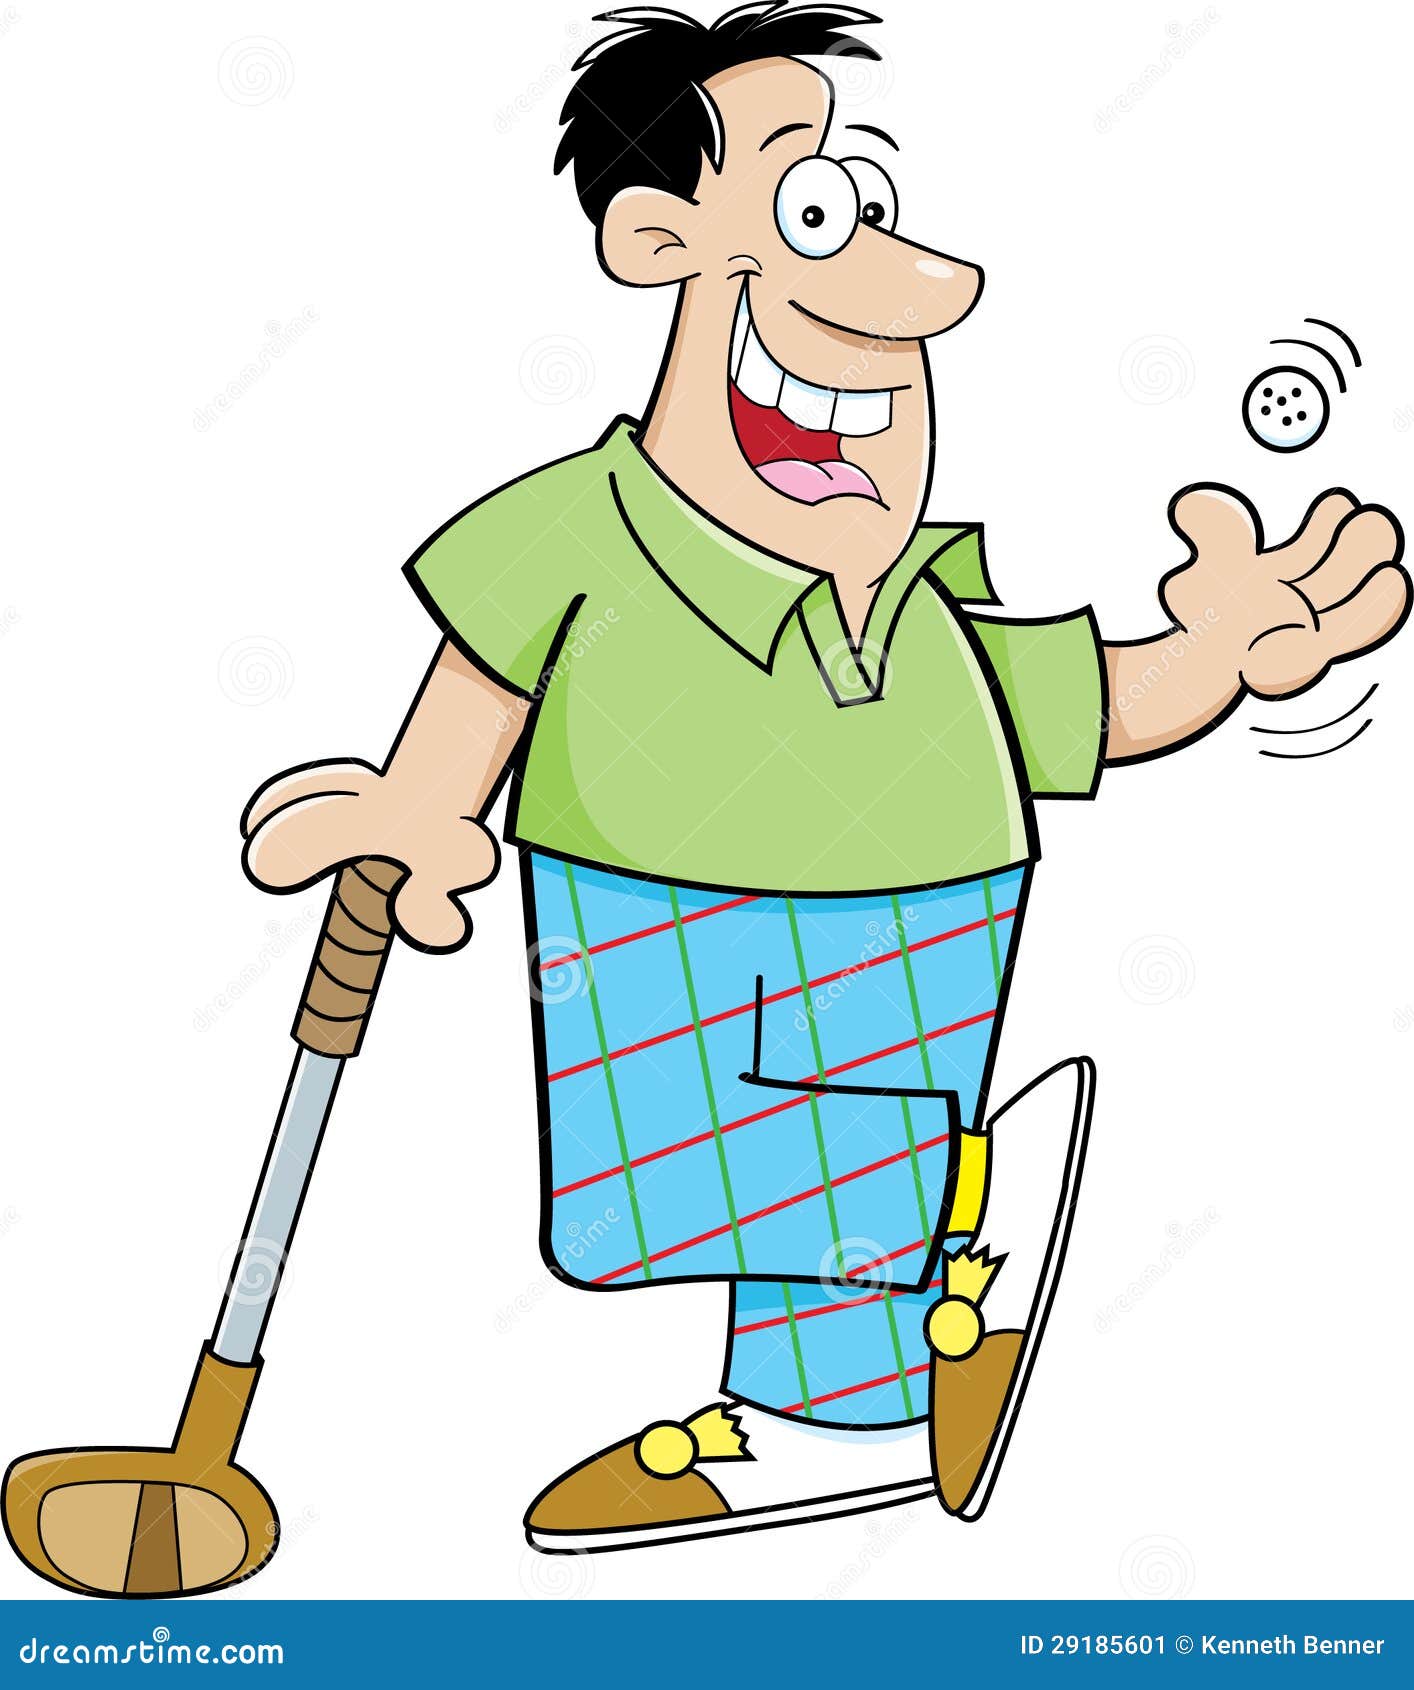 clipart man playing golf - photo #17